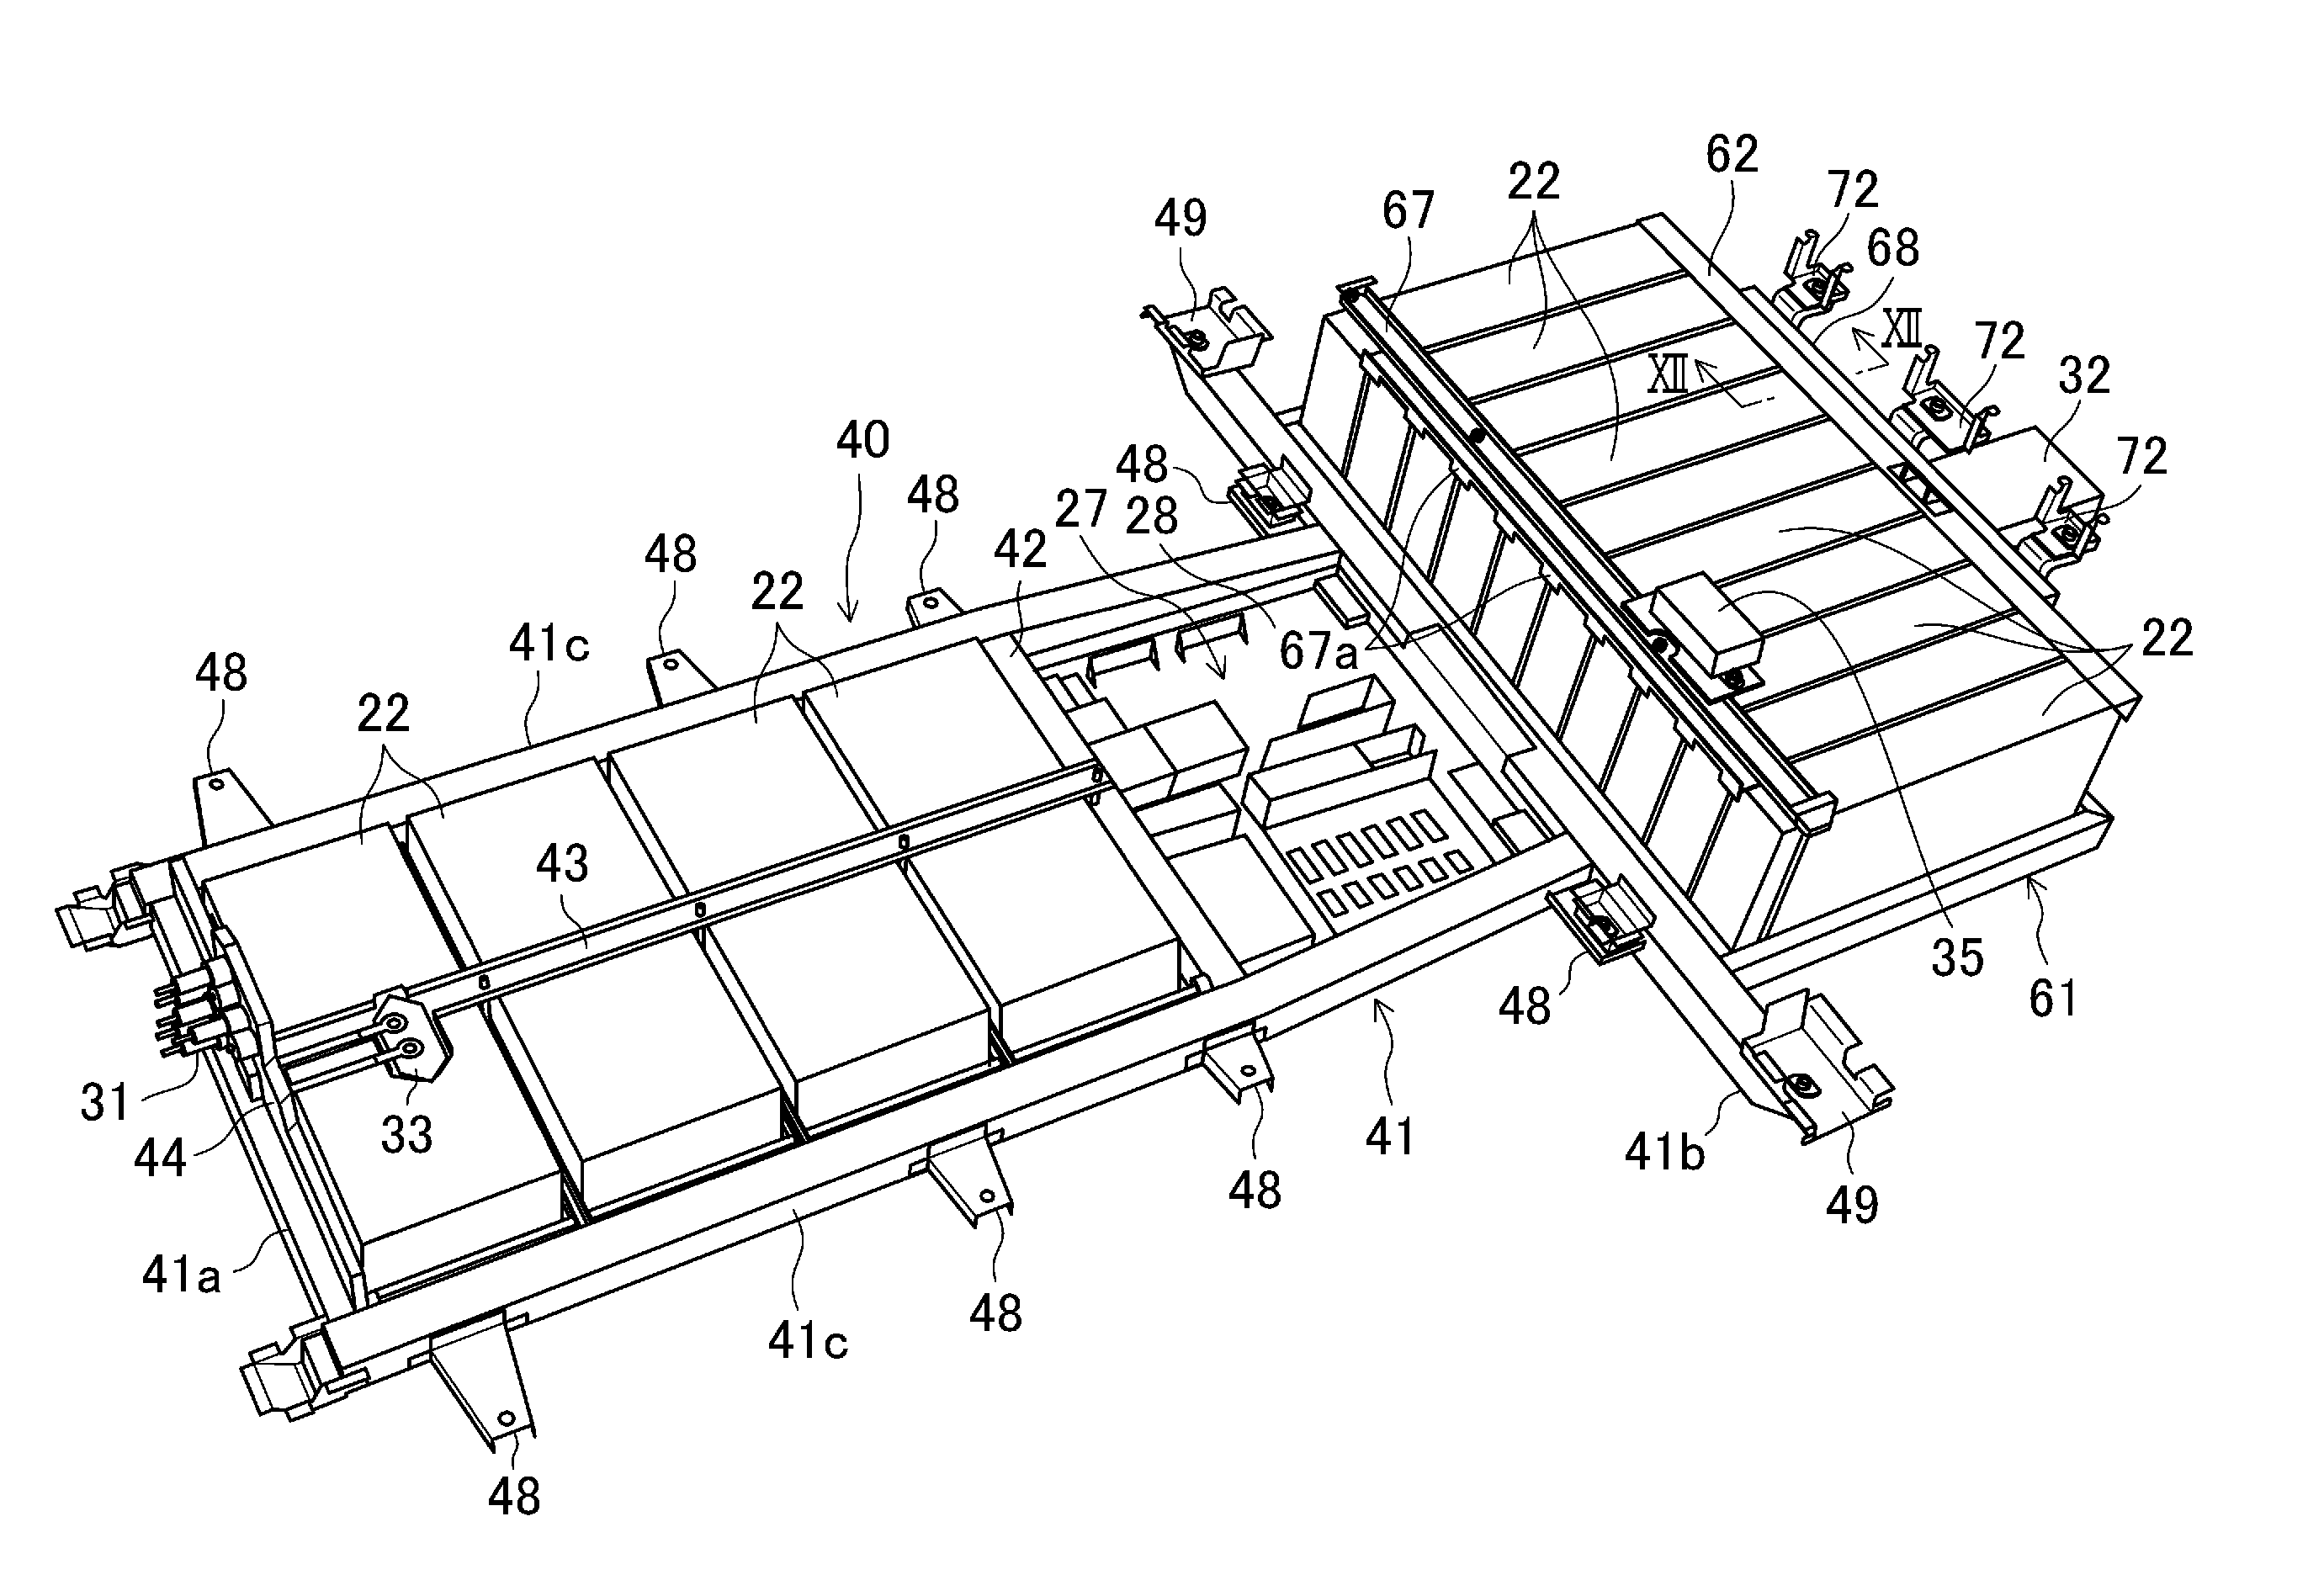 Battery mounting structure of electromotive vehicle